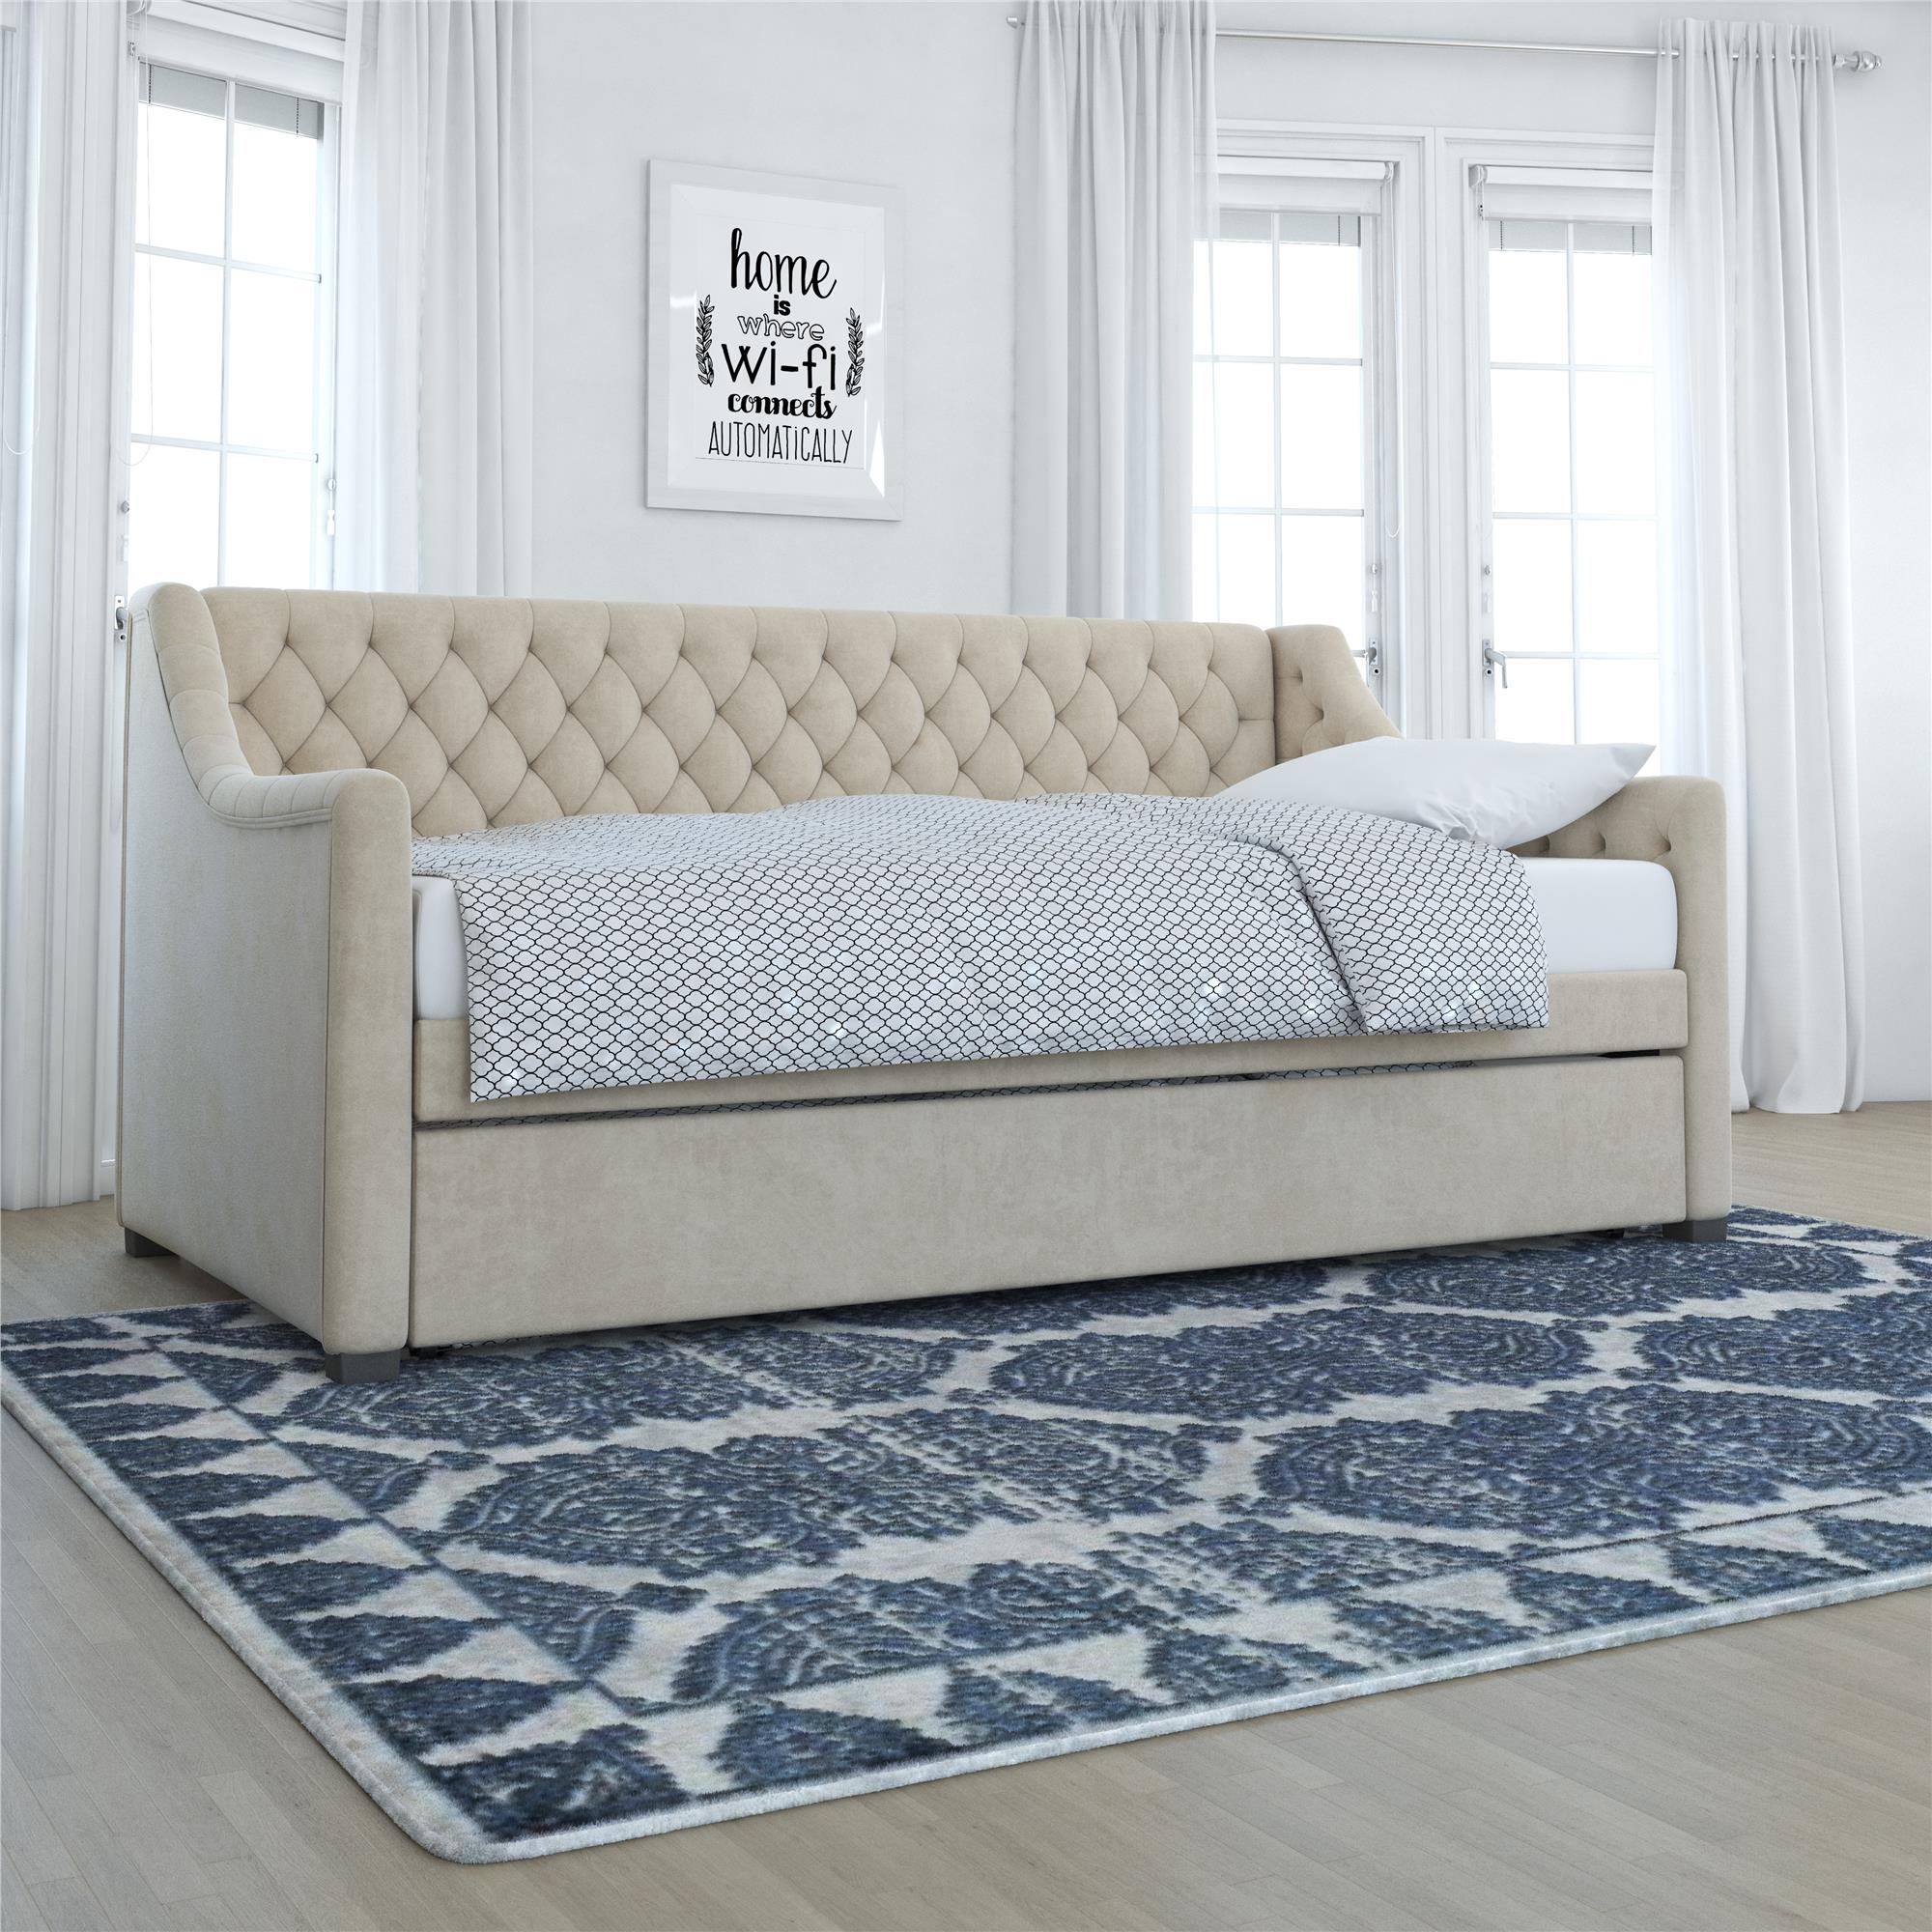 Little Seeds Monarch Hill Ambrosia Daybed and Trundle, Ivory Velvet, Twin - image 3 of 26